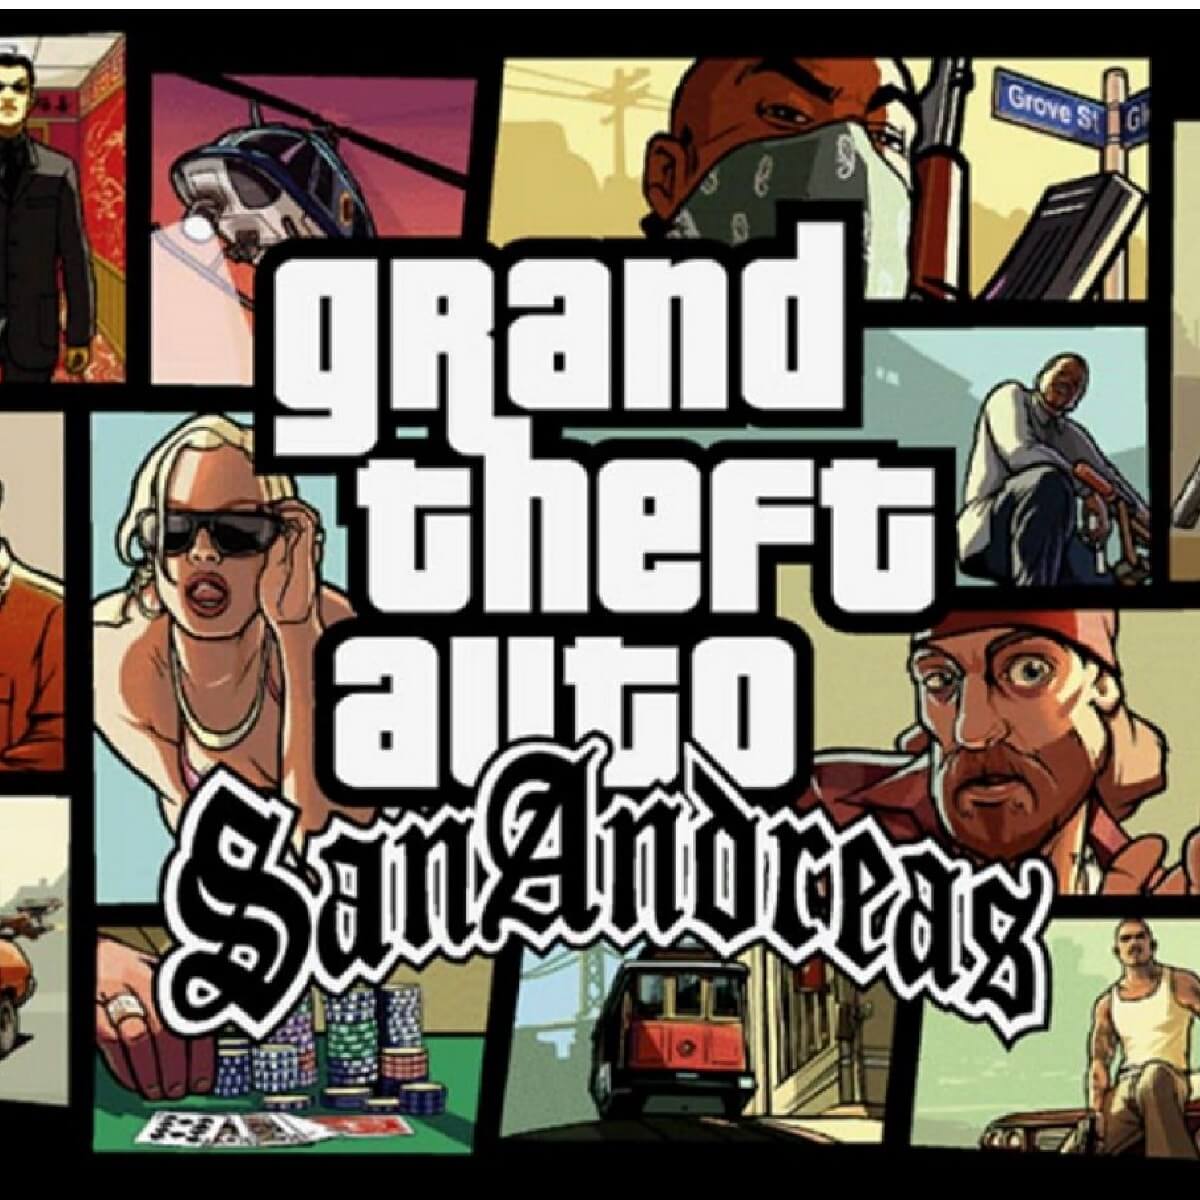 How To Download GTA San Andreas For PC Windows 10 For FREE?